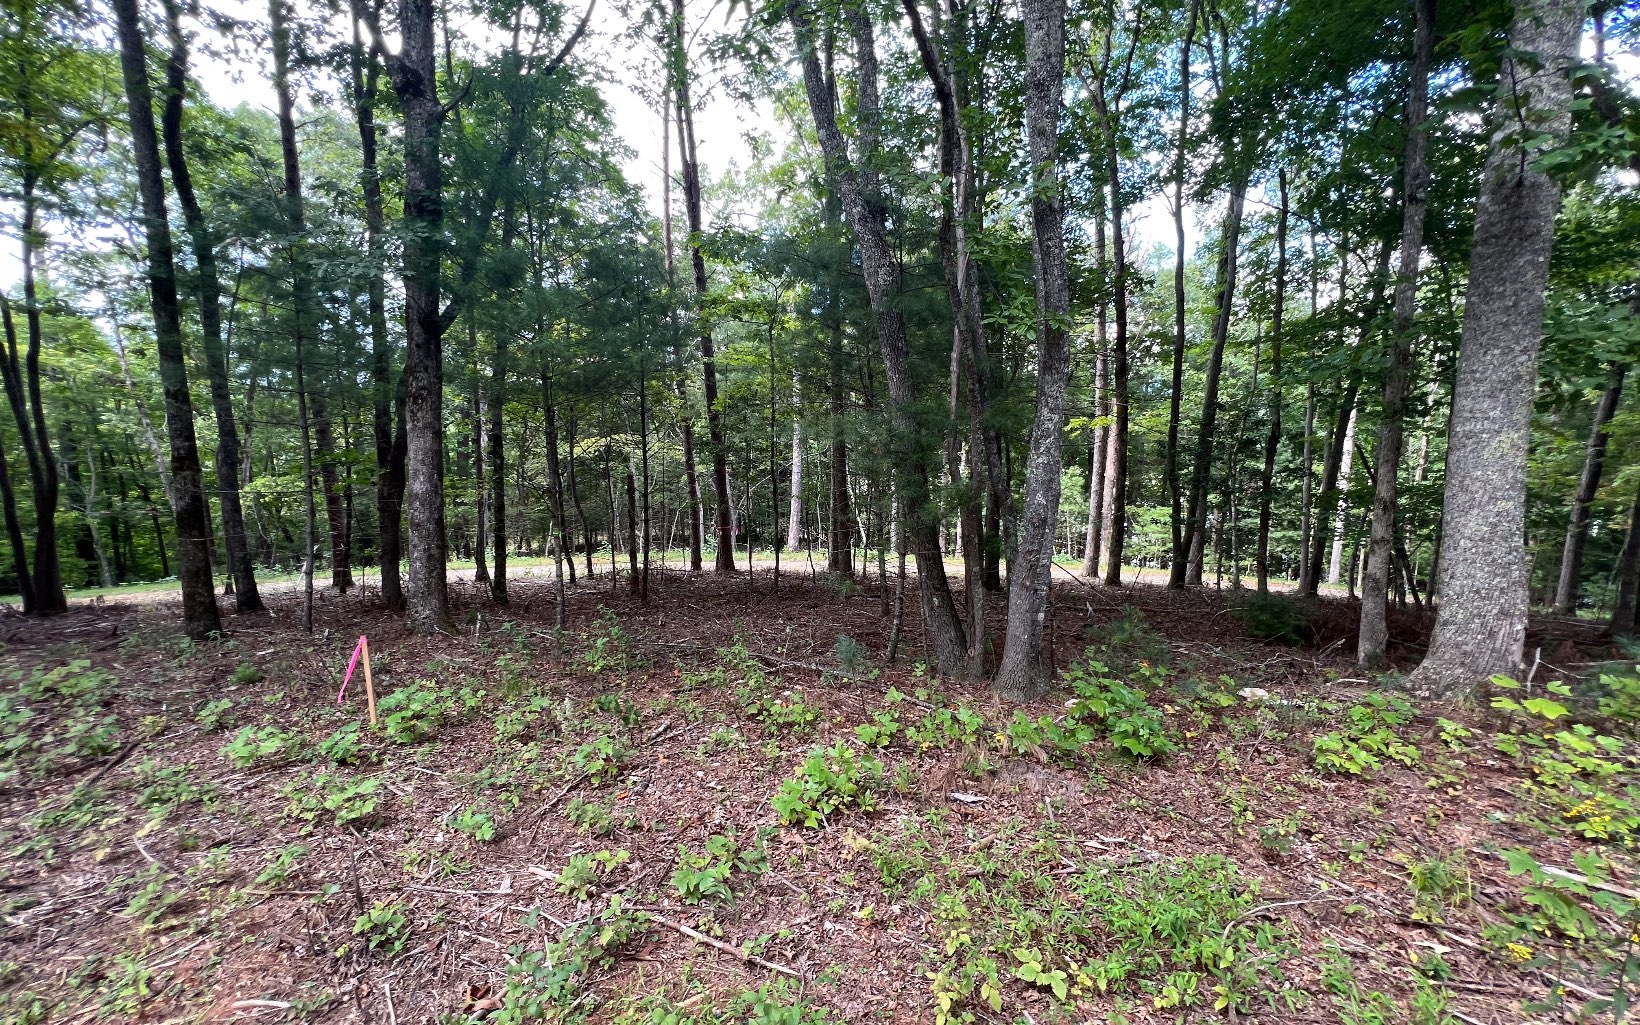 Bring your home plans. 3 Acre Building lot with Amazing View Potential, Level enough for slab foundation if desired! Hard to find minimal restrictions, gentle access in Desirable Choestoe Area. Additional lots available for total ridge top privacy.